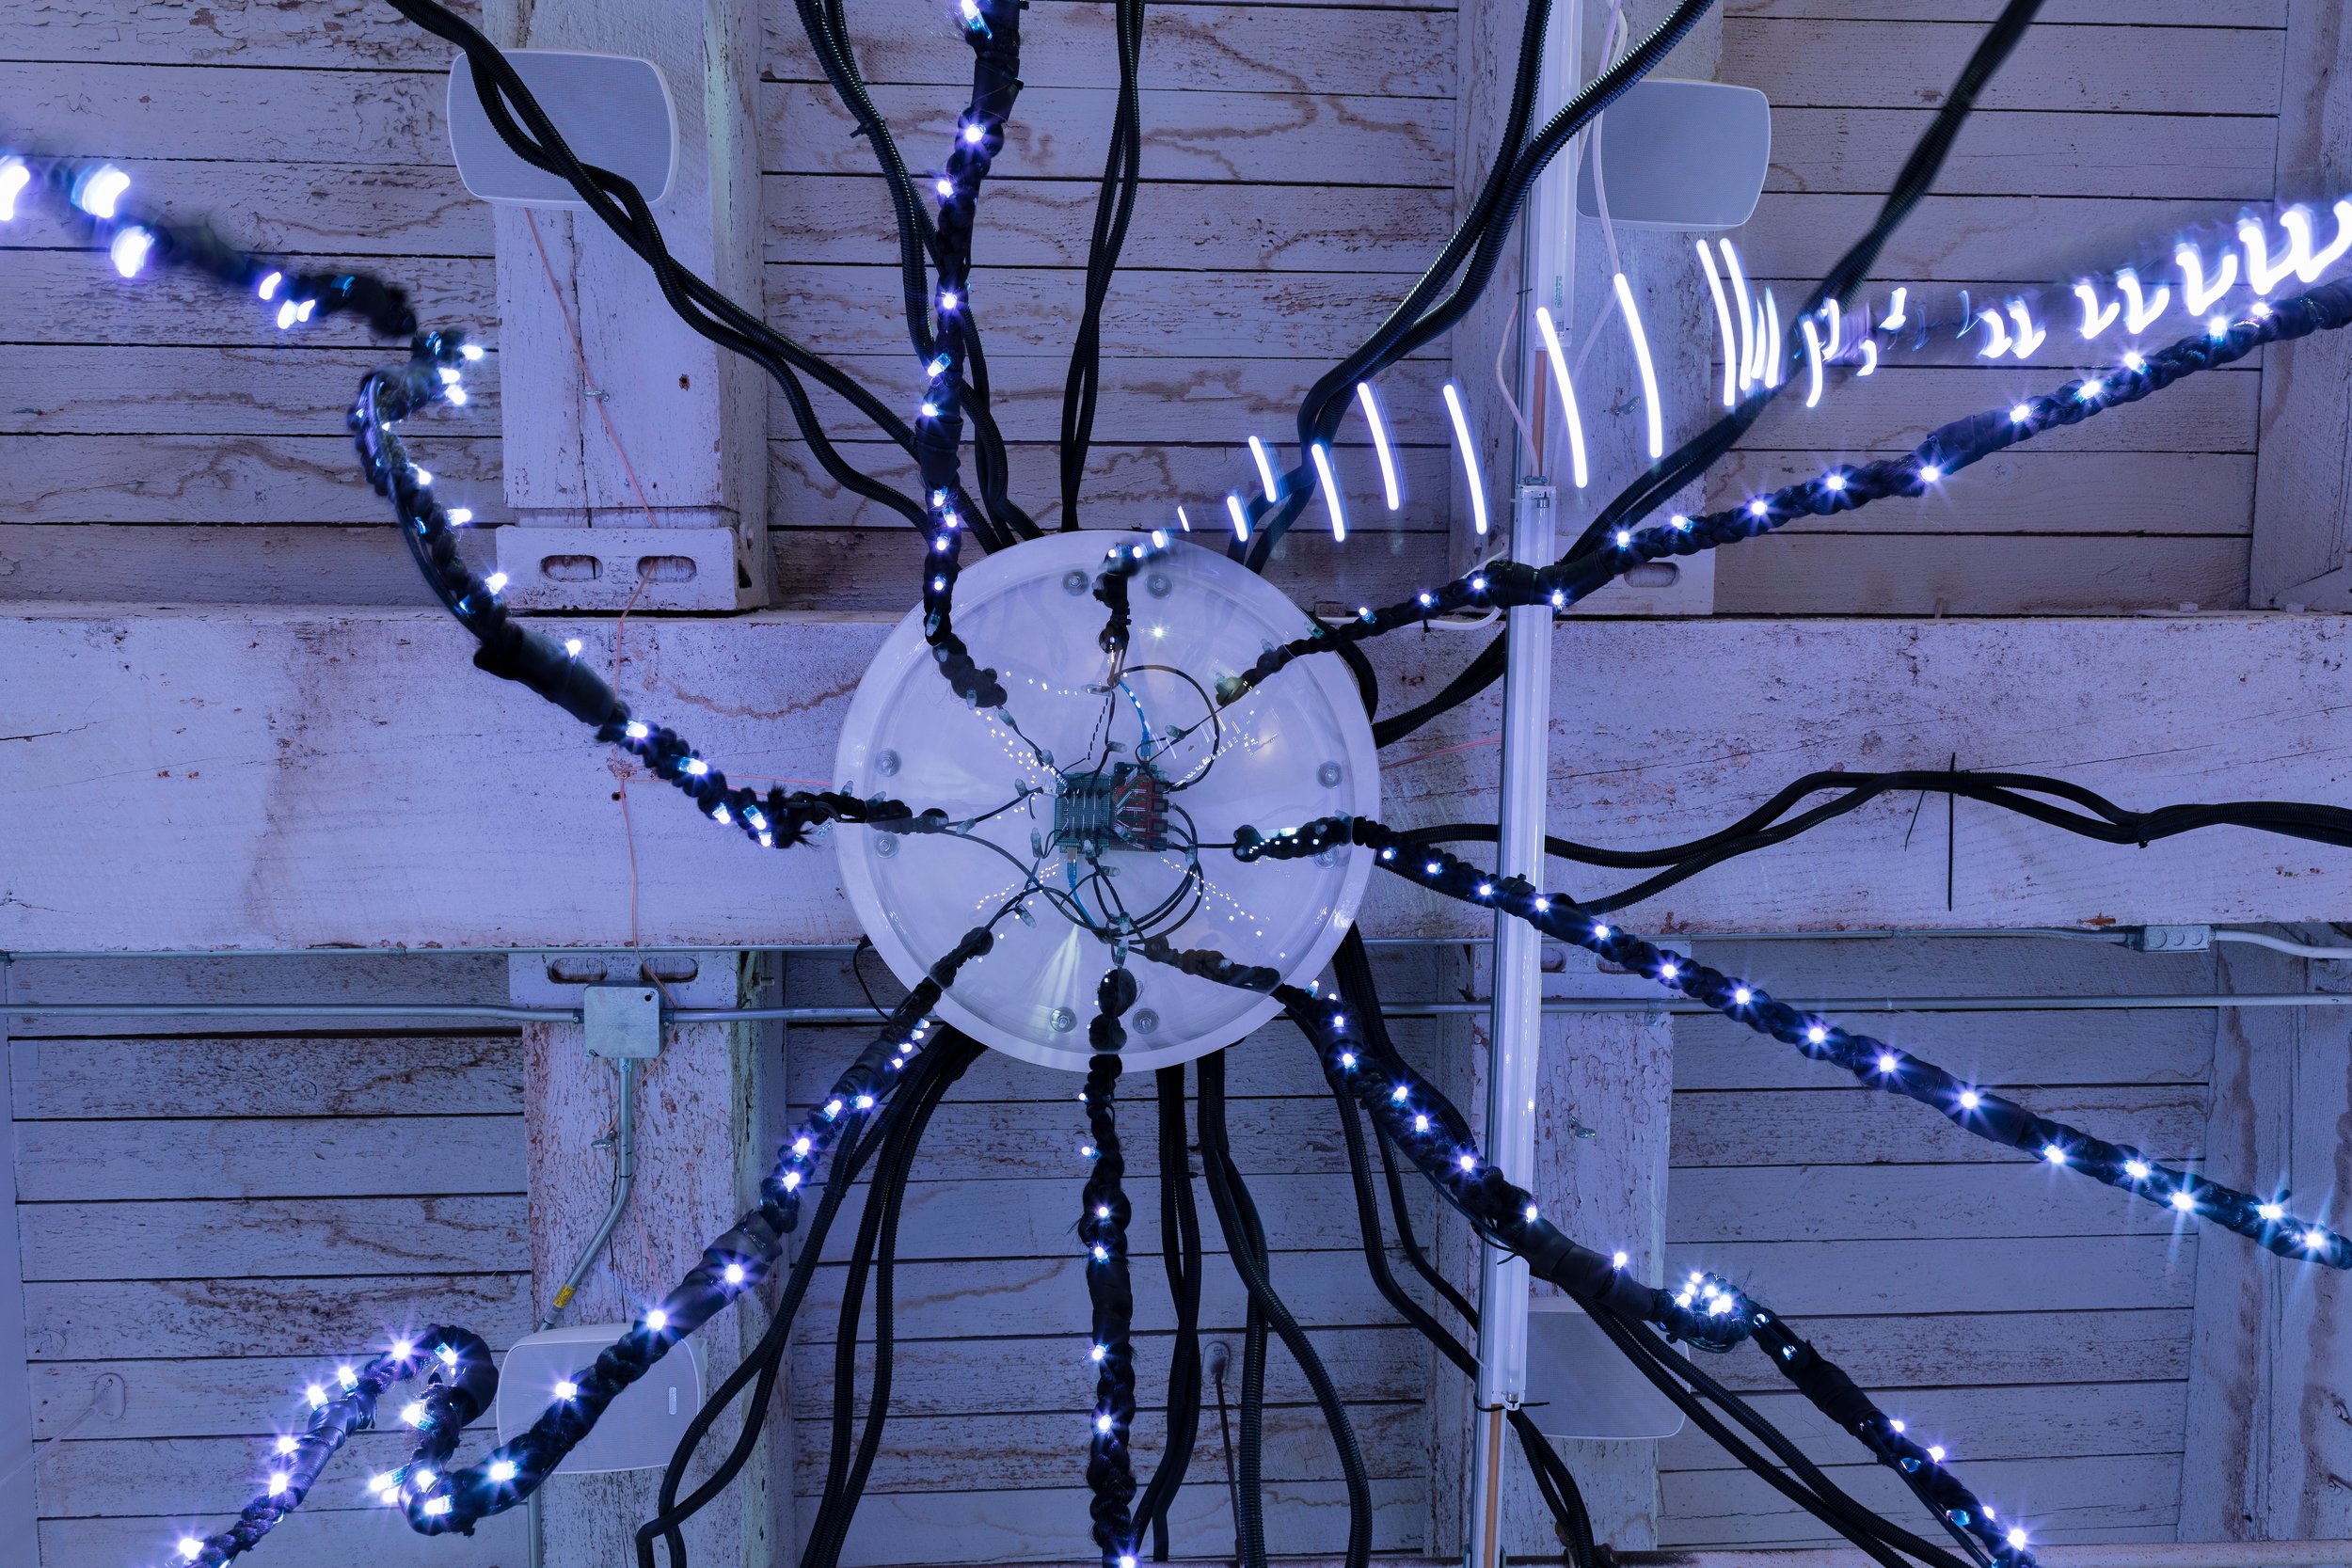 A white circuit hub on a white-washed wood background with illuminated black cords trailing out from the hub like a spider web.